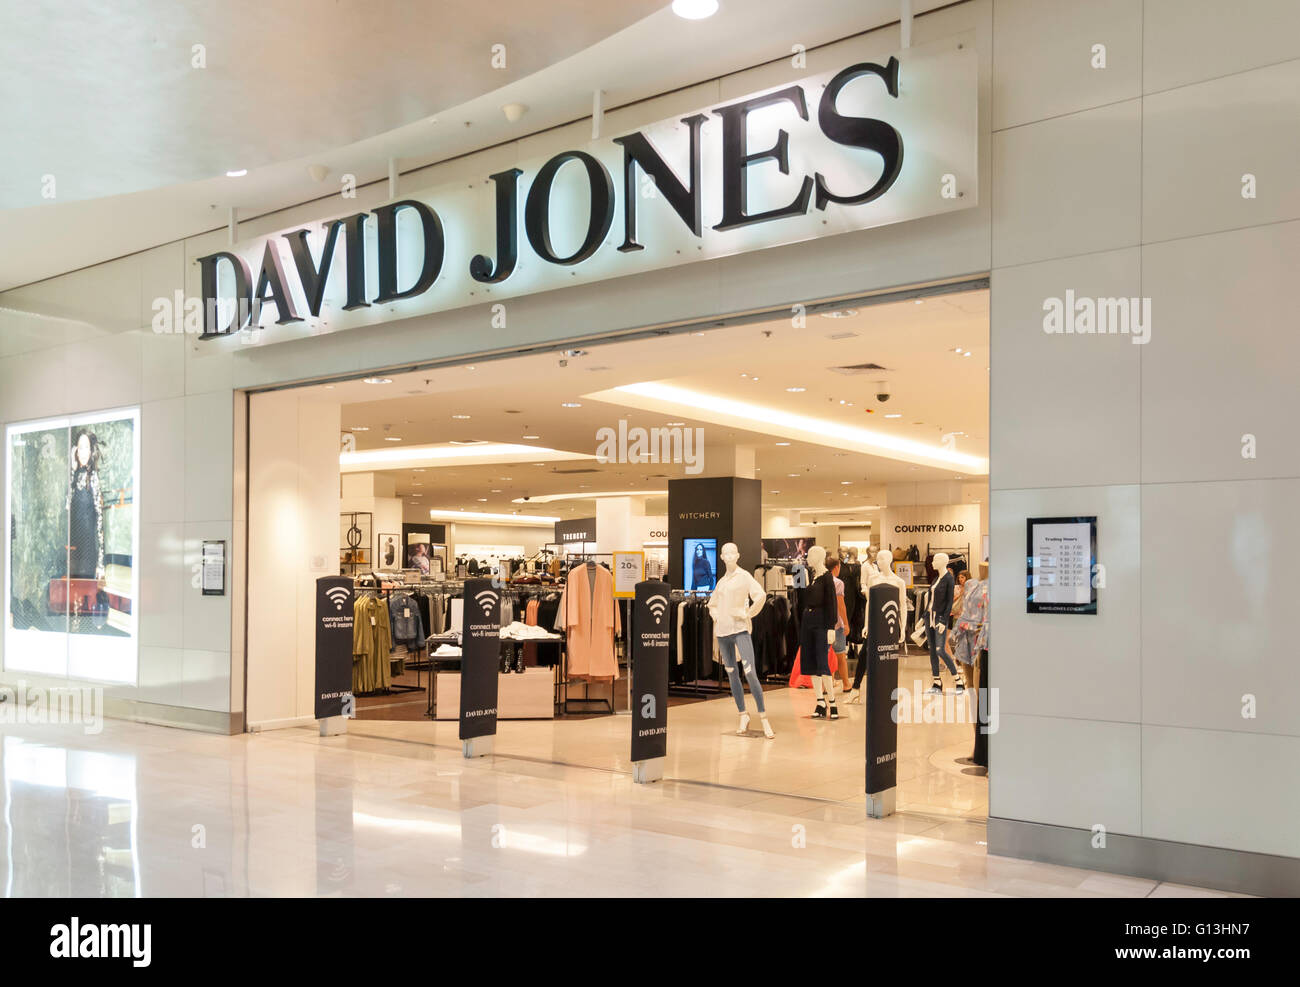 David jones store hi-res stock photography and images - Alamy